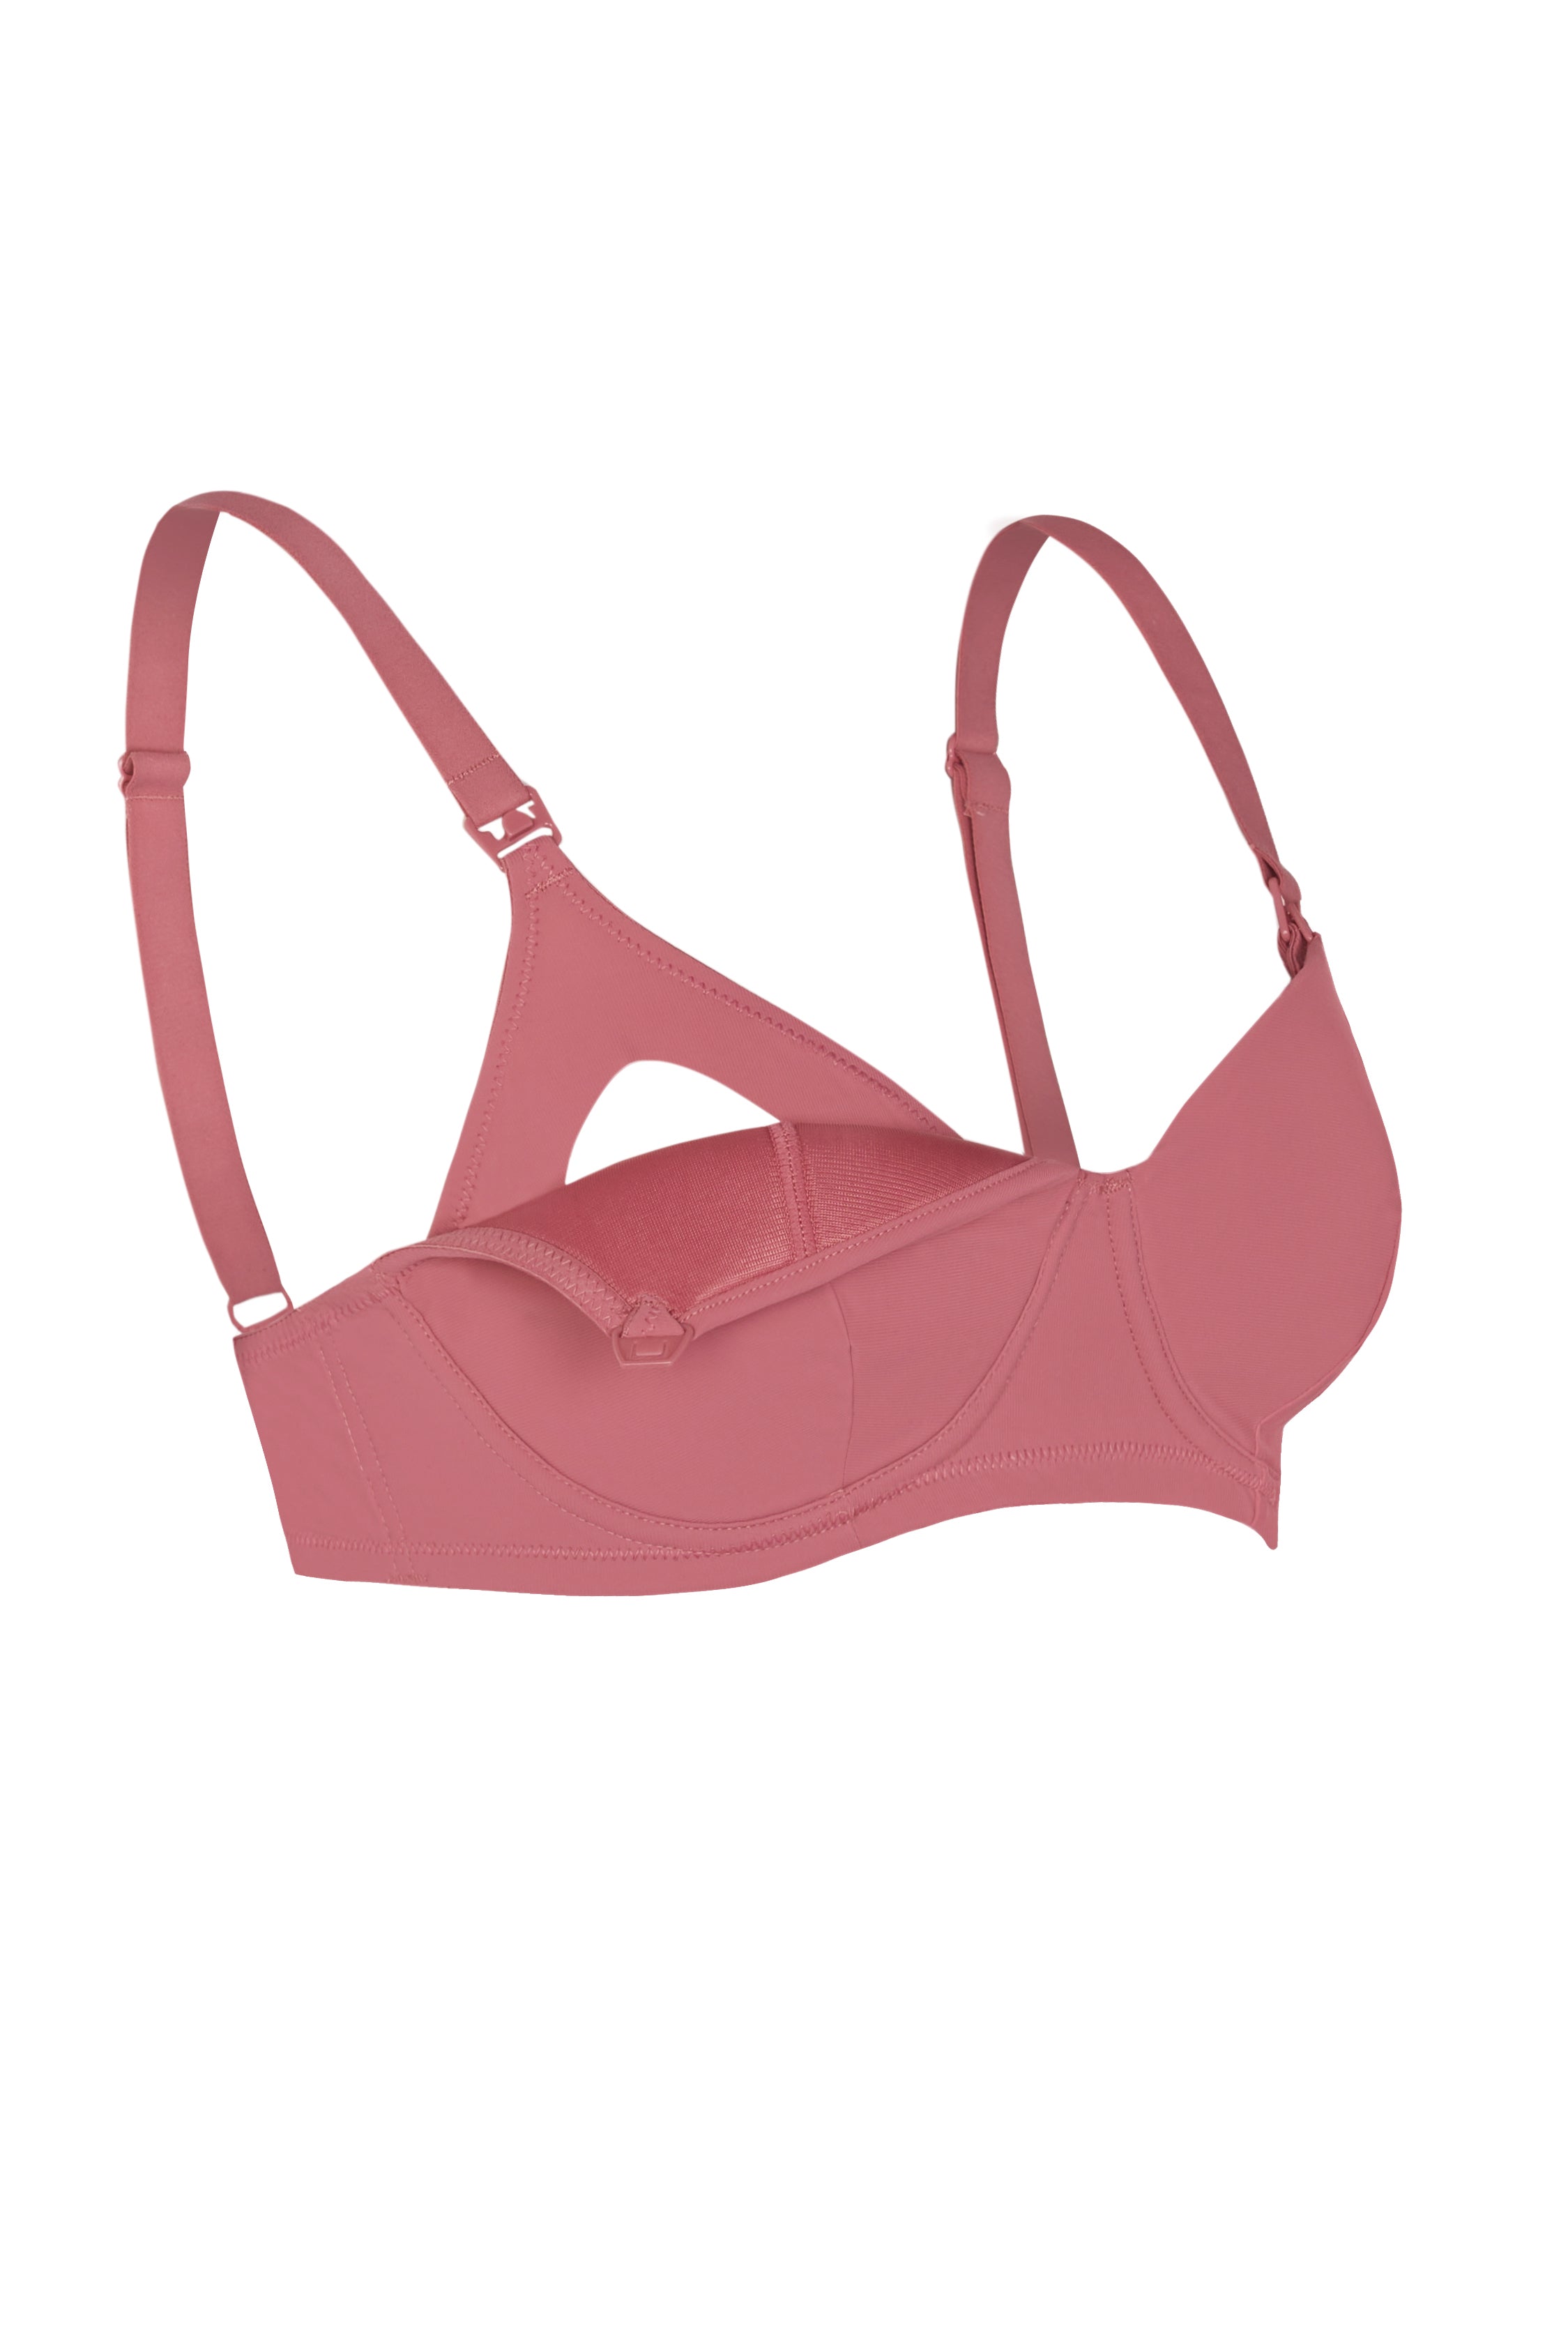 Athaelay Nursing Bra Seamless and Wireless One-Hand Easy Use for